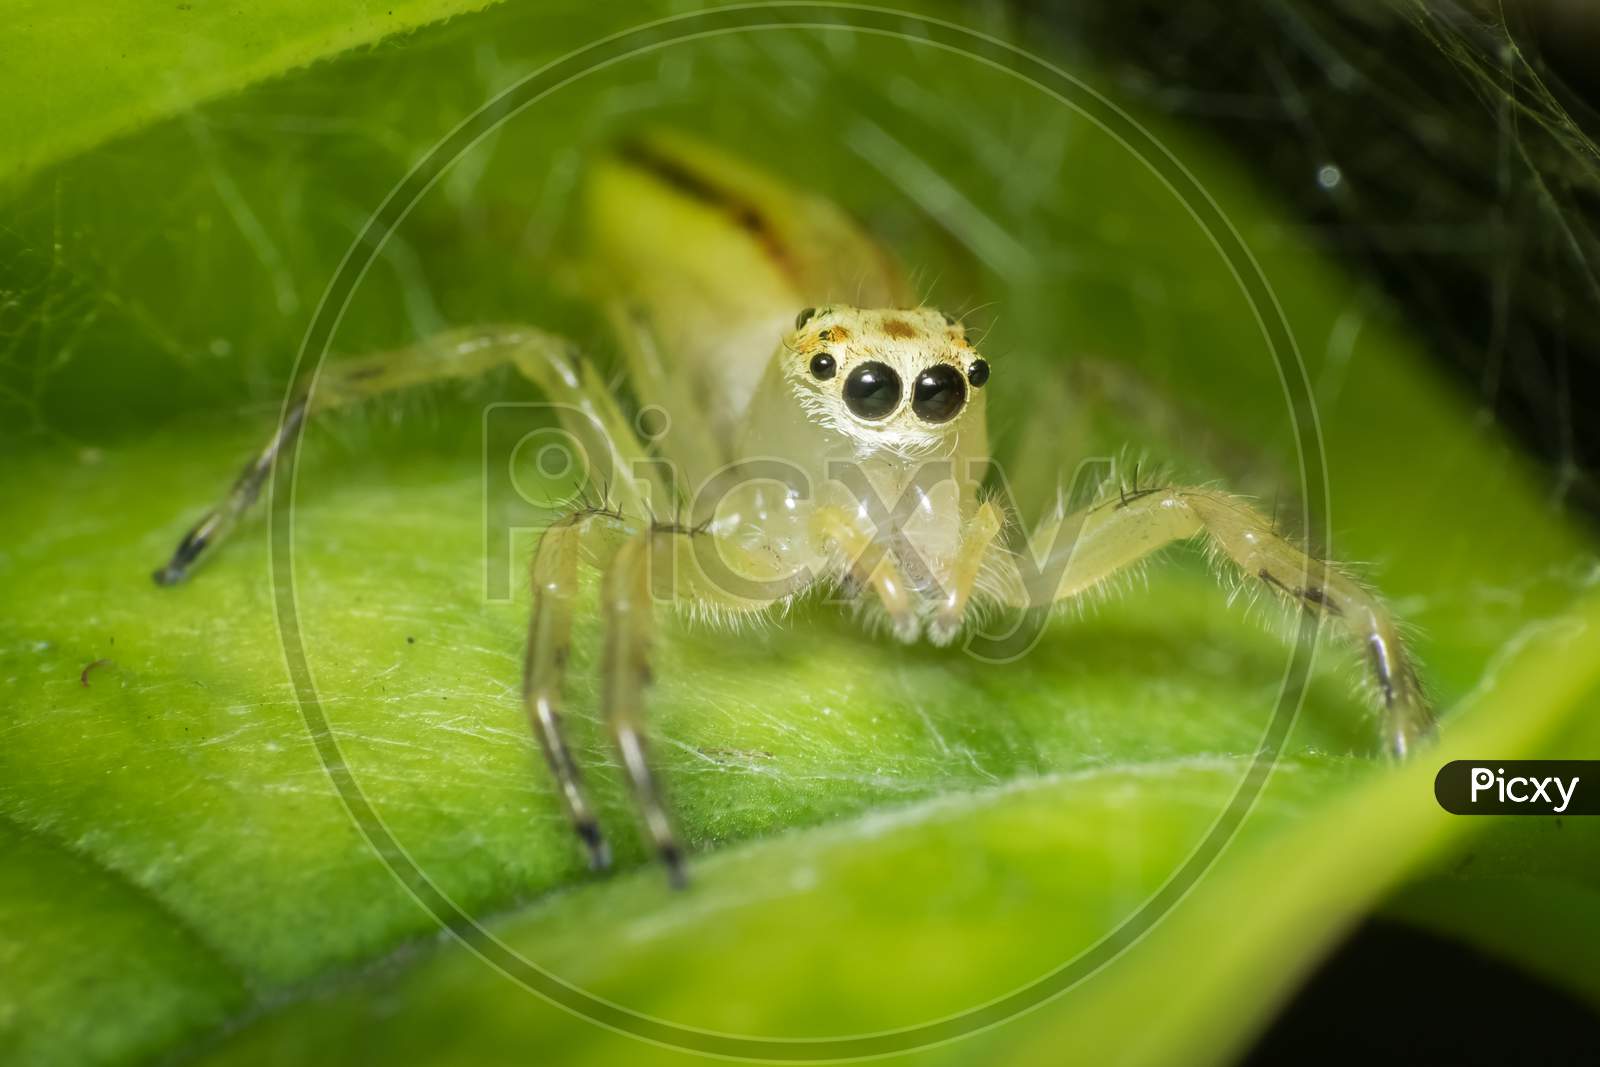 Ultra Macro Shot Of A Yellow Jumping Spider With Webs In The Background. Sitting On A Green Leaf